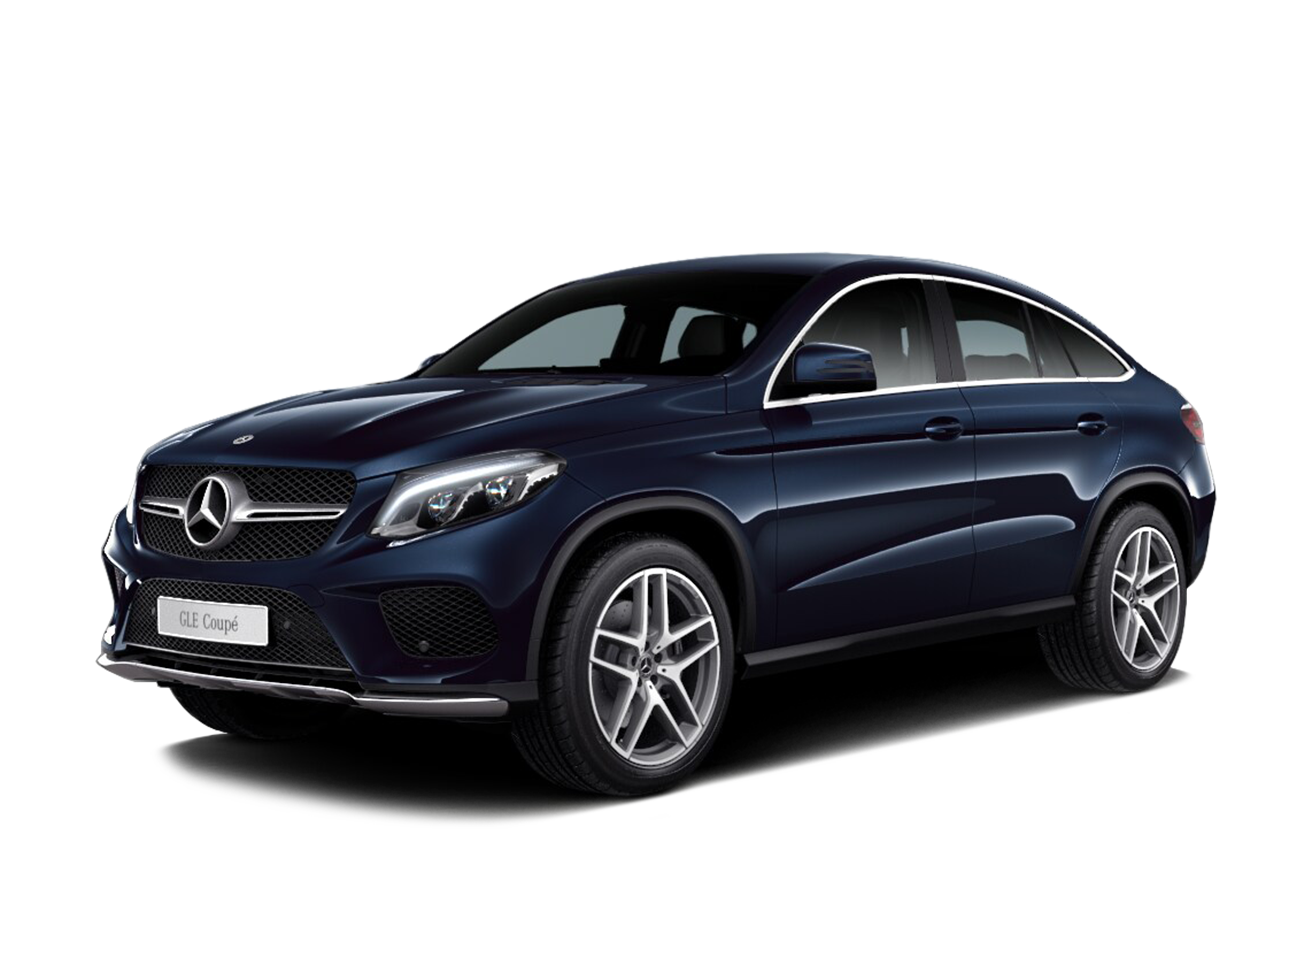 MERCEDES-BENZ - GLE 400 - 3.0 V6 GASOLINA HIGHWAY COUPÉ 4MATIC 9G-TRONIC